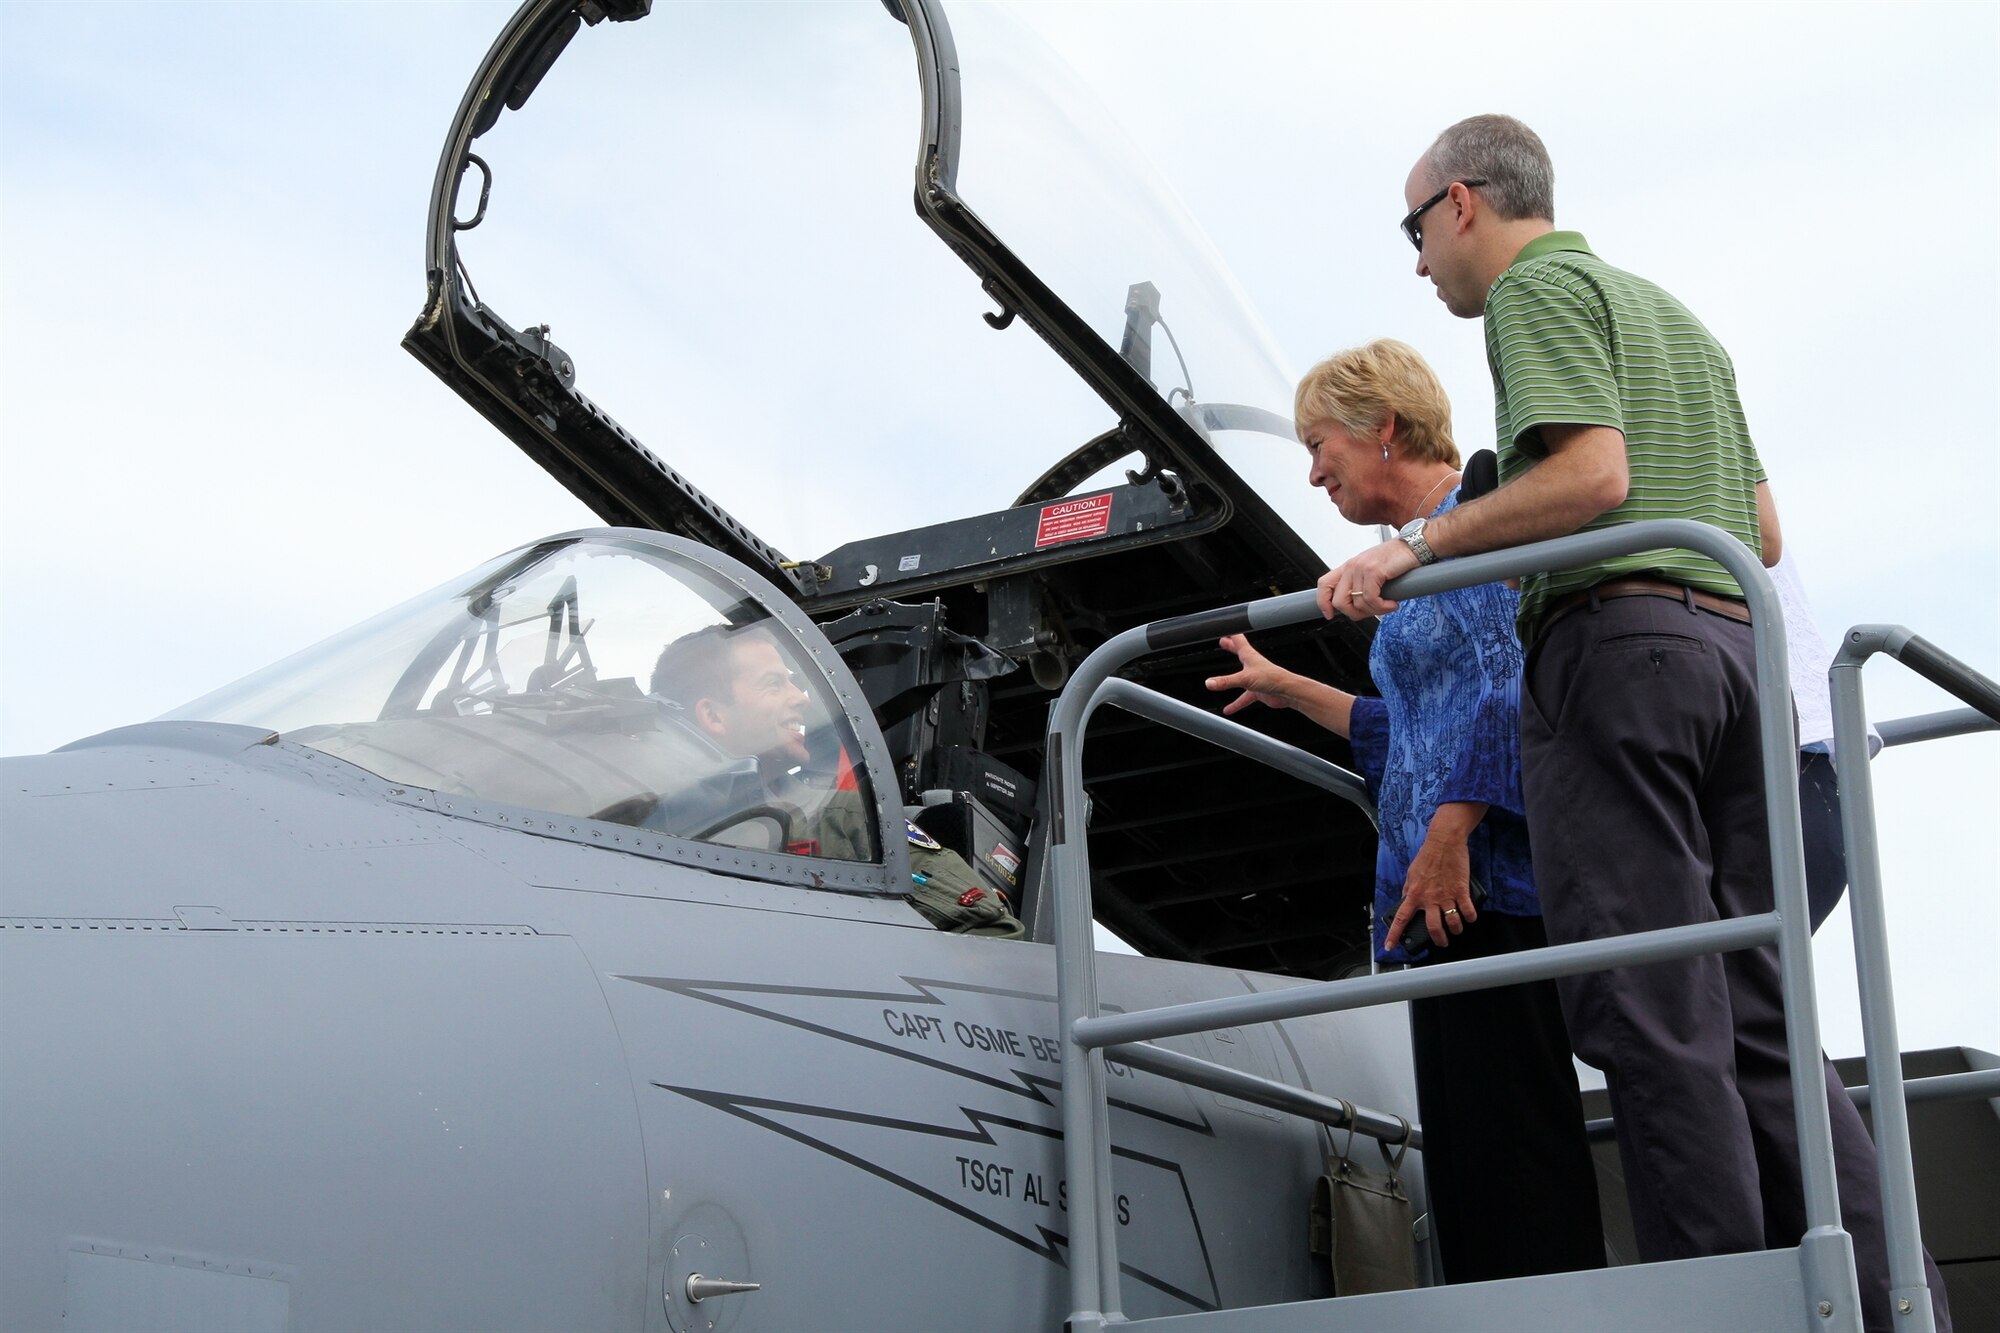 Barbara Bohman, chief of F-15 integration, and Jim Ehret, chief of F-15 contracts, discuss F-15 capabilities with Capt. Martin Clark of the 104th Operations Group, Barnes Air National Guard base. Bohman worked on the F-15 for 14 1/2 years. (Skywrighter photo by Kathy Tyler)